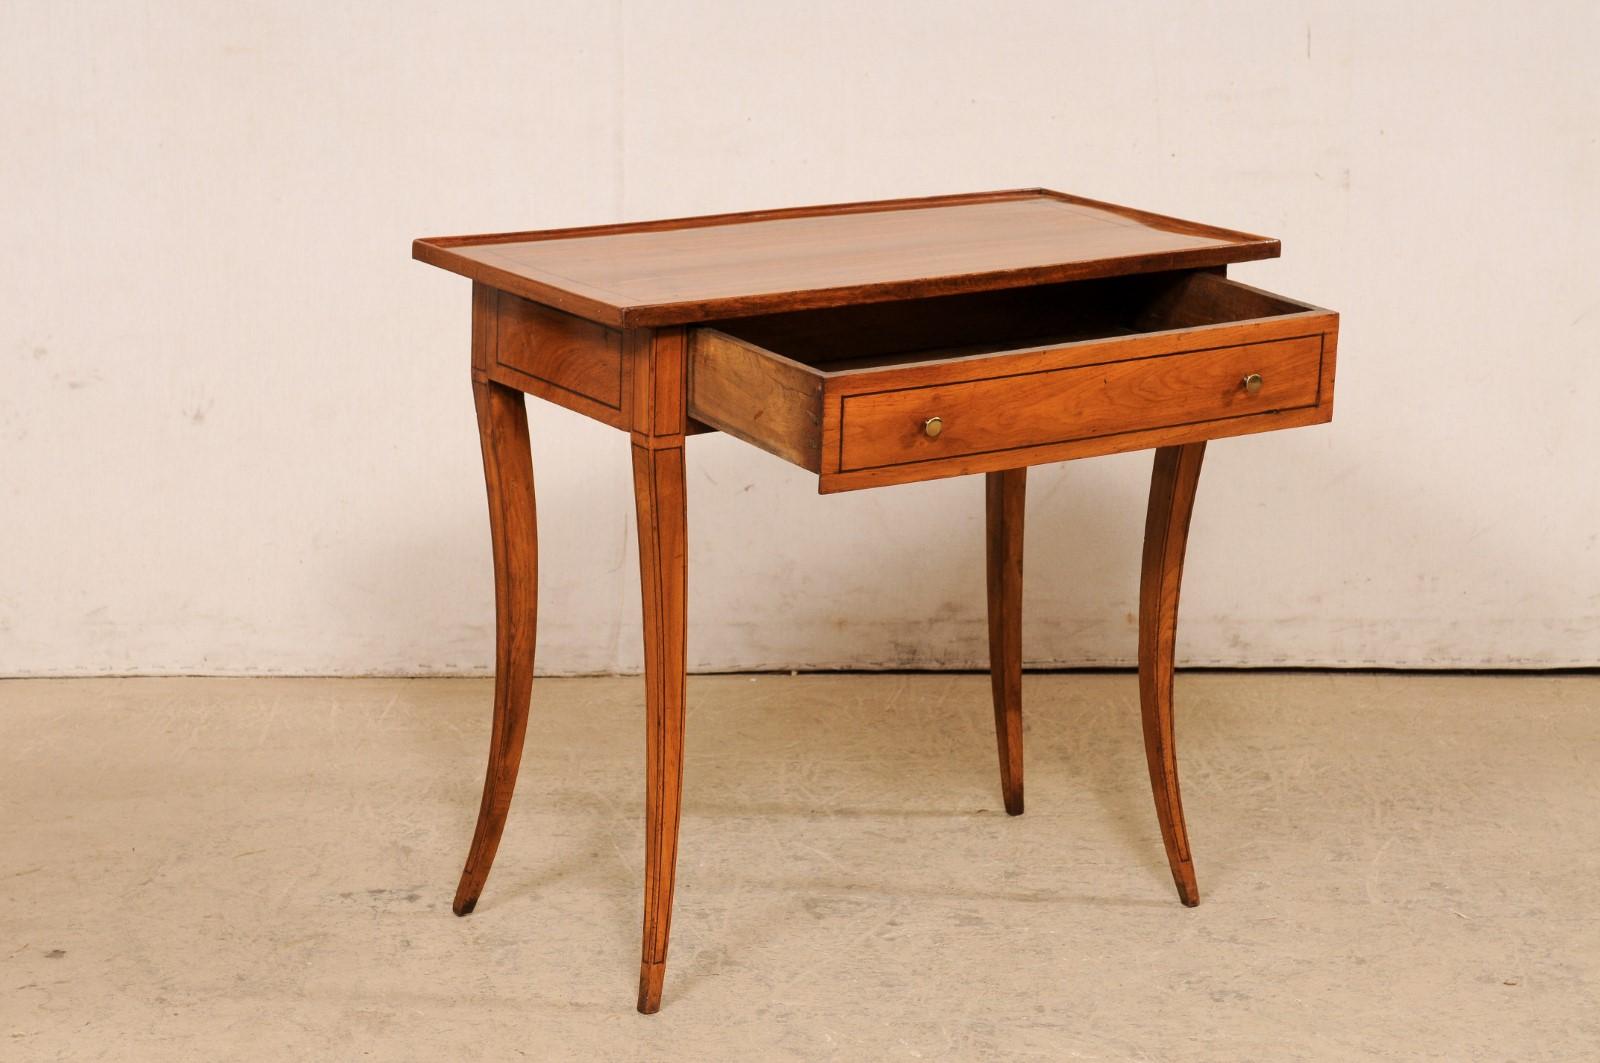 An Early 19th C. Italian Occasional Table w/Inlay Accents & Elegant Sabre Legs In Good Condition For Sale In Atlanta, GA